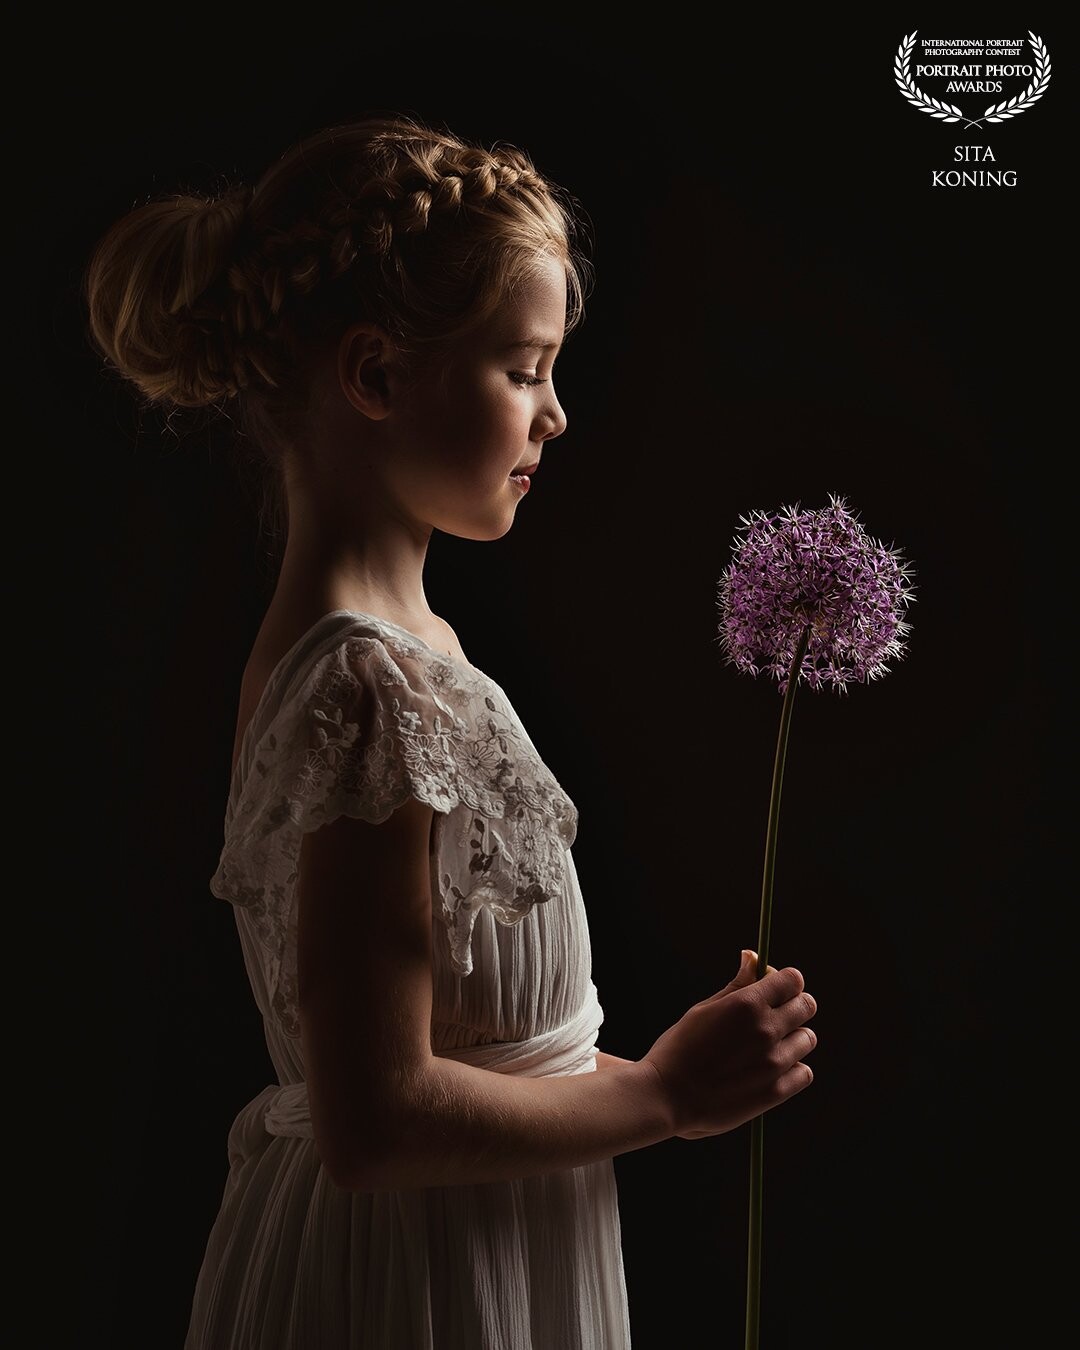 She comes to my studio every year around her birthday! Every time we try different poses and settings. In her beautiful white dress she holds a pretty flower. The settings of the light combined with the clothing and hairstyling makes this a very romantic picture